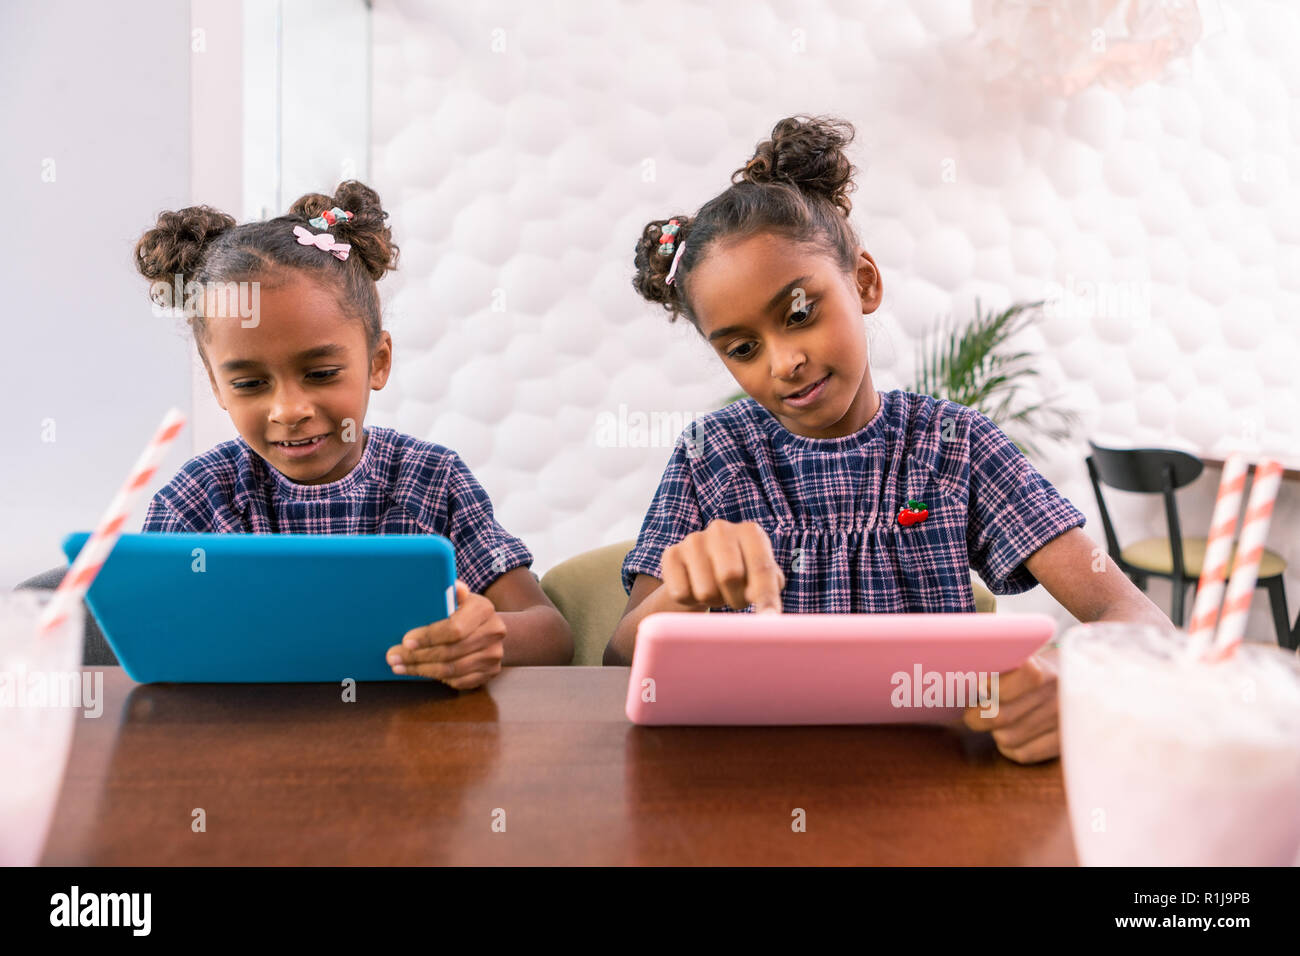 Cute siblings having the same hairstyles holding pink and blue tablets Stock Photo